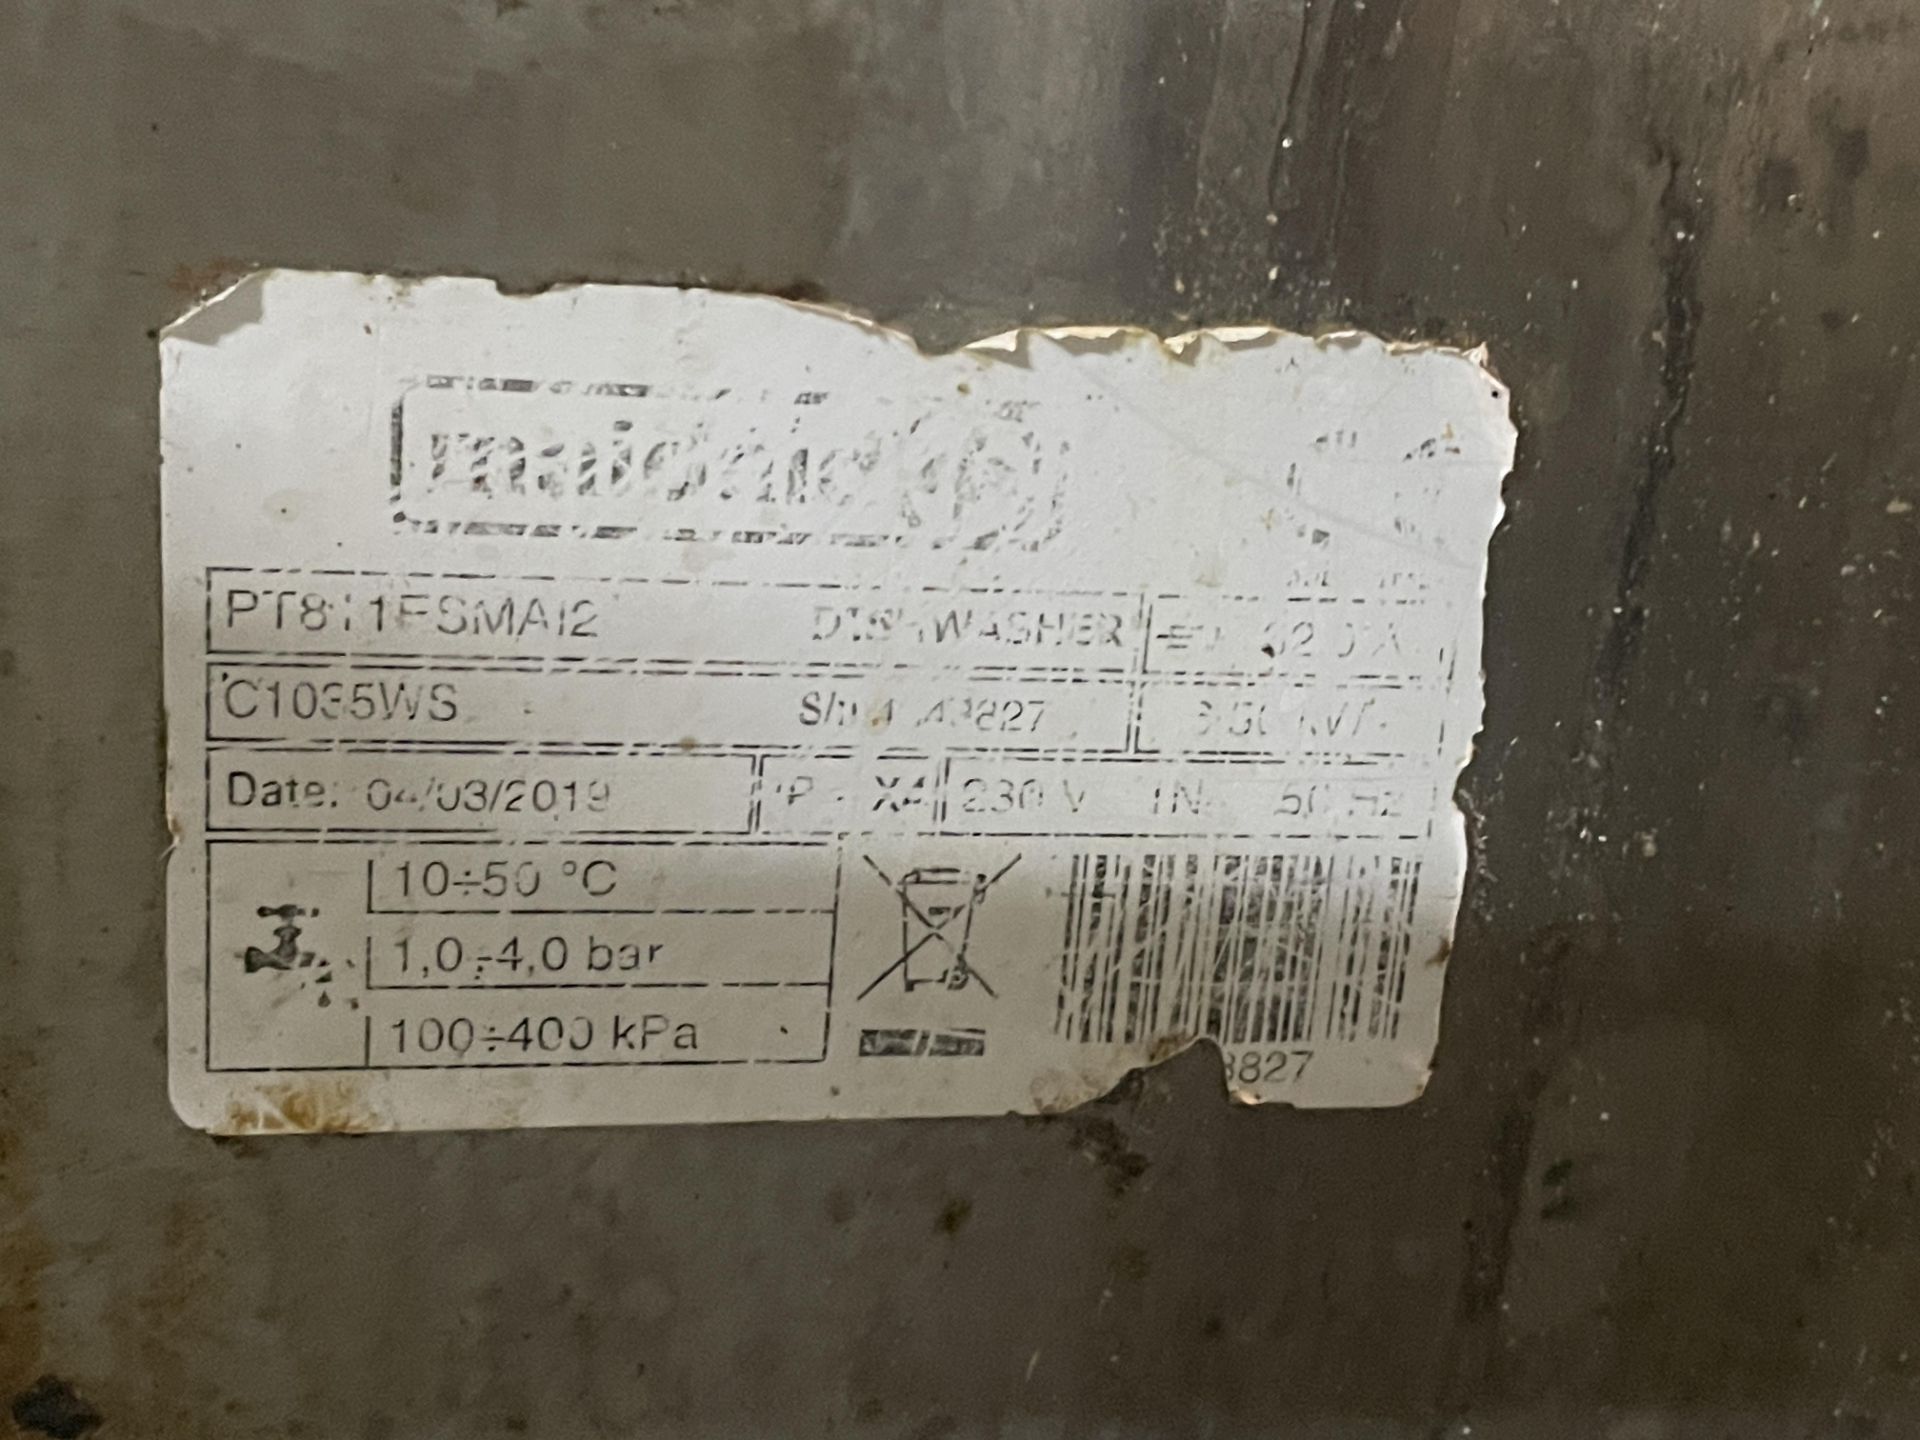 1 x Maidaid C1035WS Commercial Passthrough Dishwasher - 230v - 2019 Model - Image 3 of 11